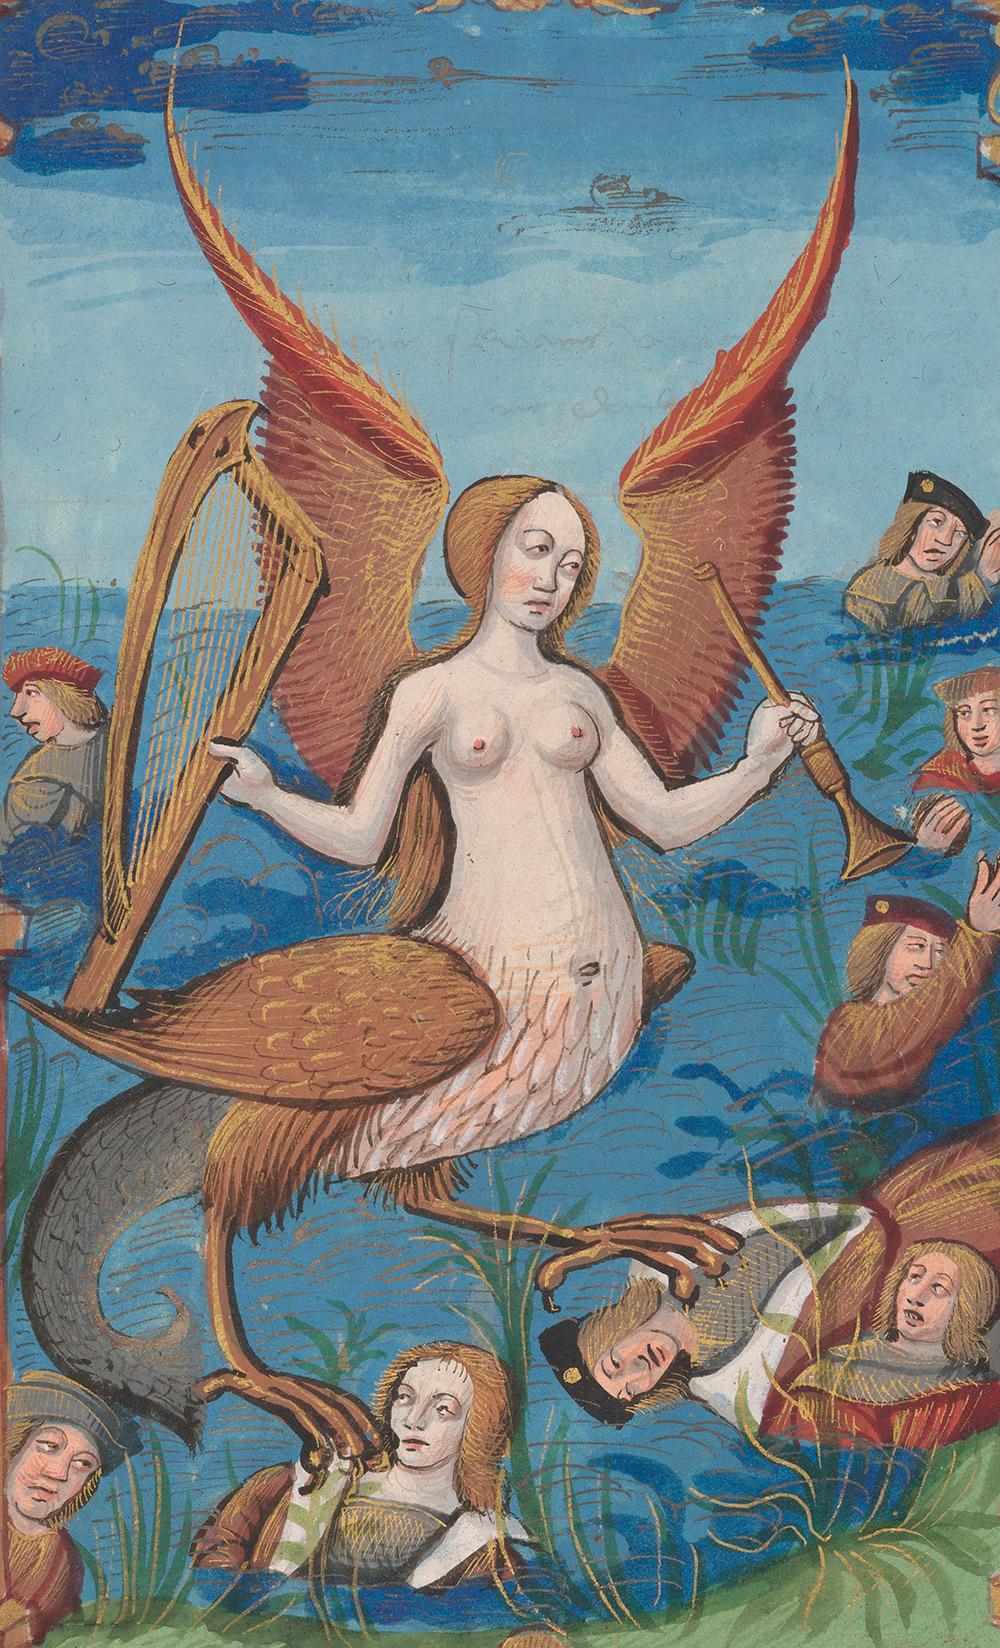 “Siren," from "Abus du Monde" ("The Abuses of the World"), Rouen, France, circa 1510. The Morgan Library & Museum. (Janny Chiu)